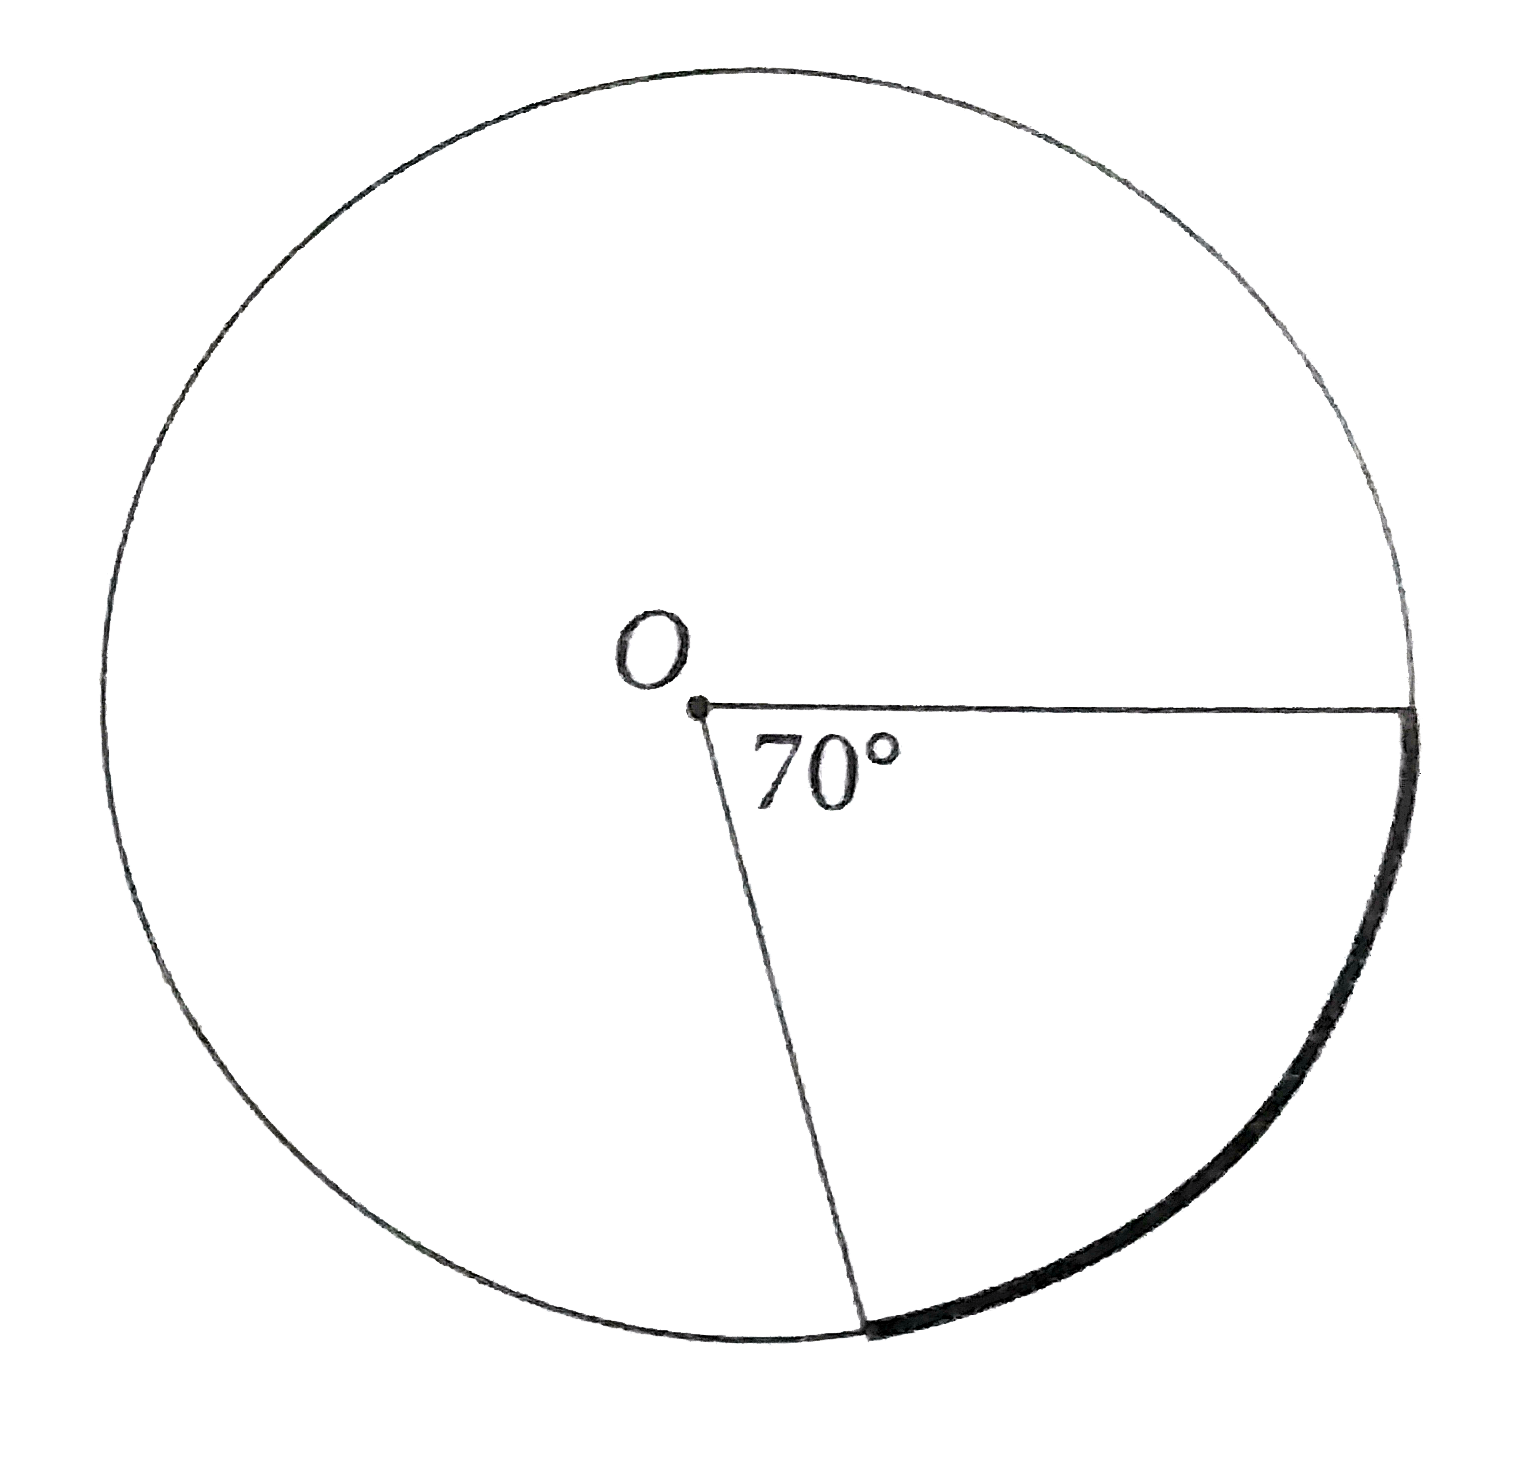 Point O is the center of the circle above. What fraction  of the circumference of the circle is the length of the bolded arc?